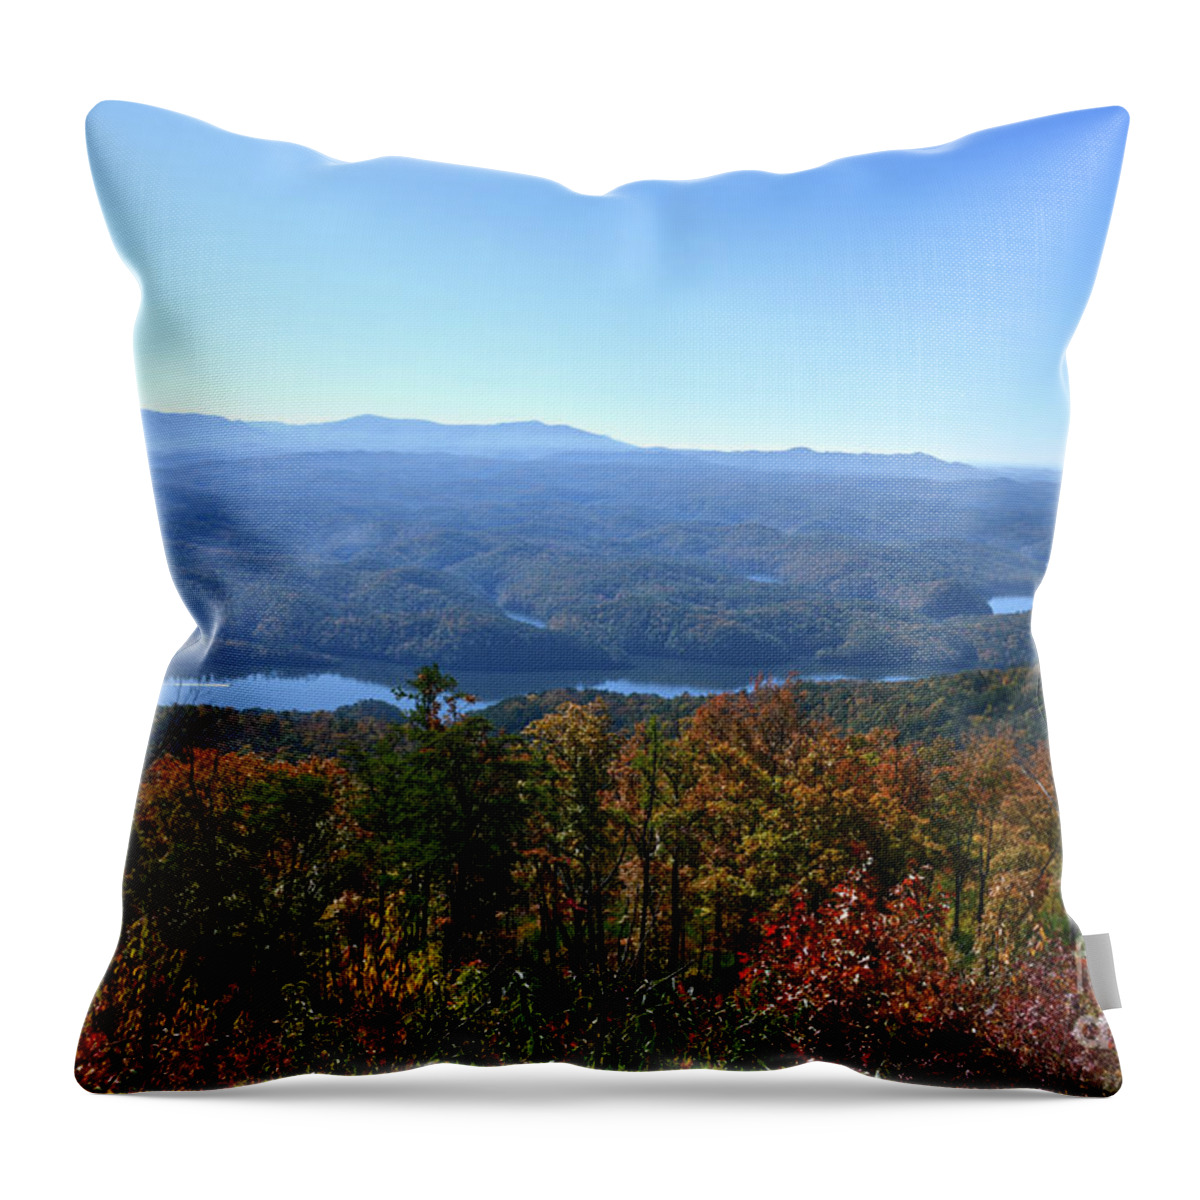 Tennessee Throw Pillow featuring the photograph Lake Ocoee 1 by Phil Perkins